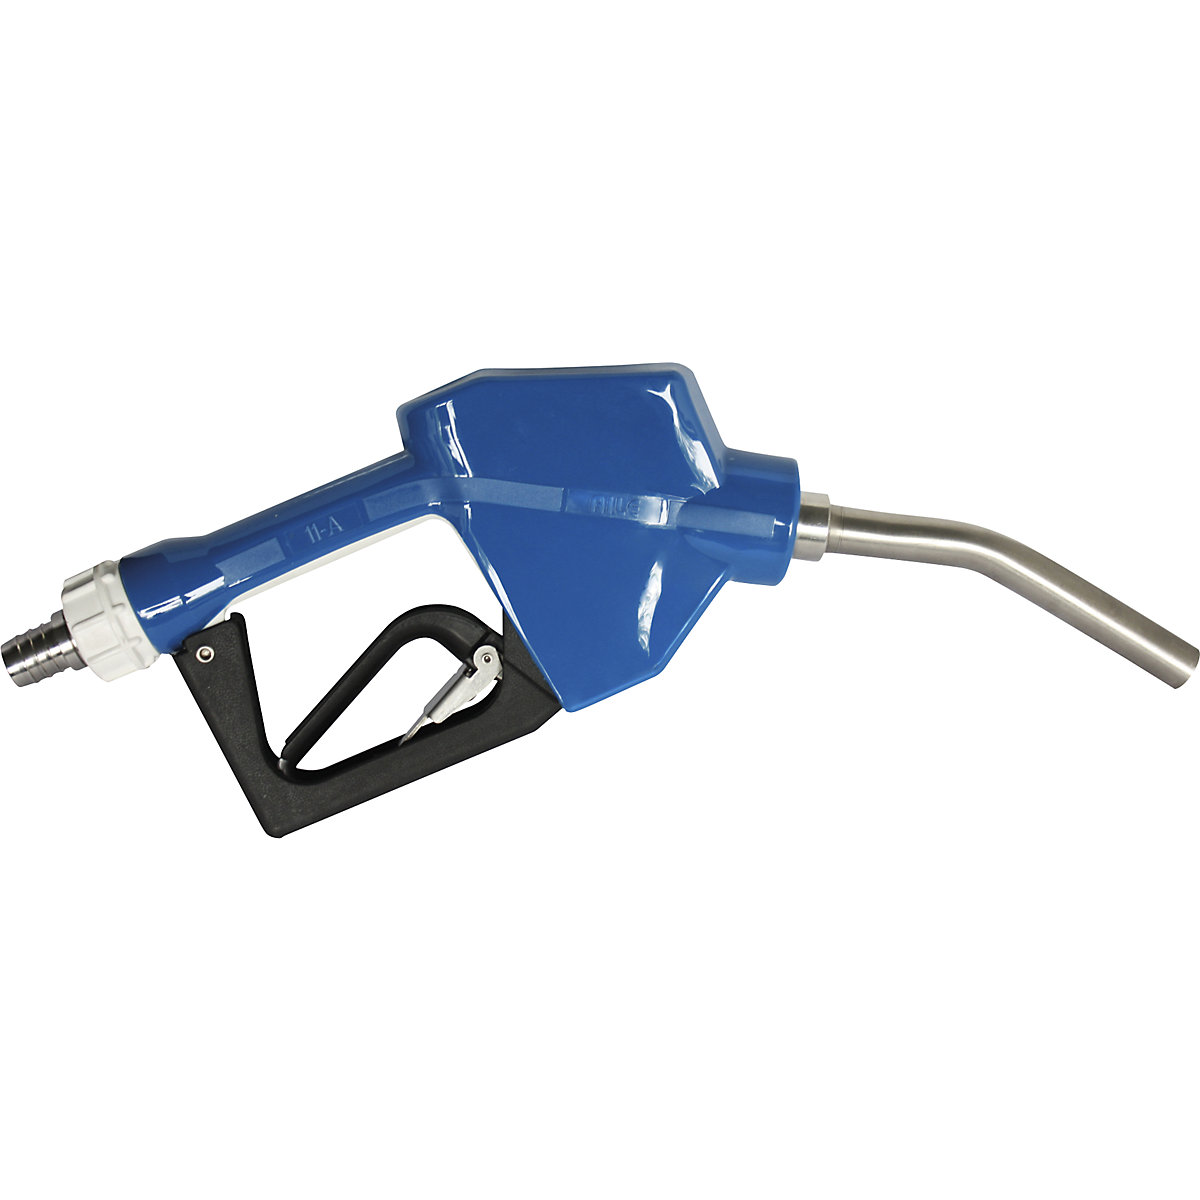 Automatic pump pistol for AdBlue – Jessberger, stainless steel, for trucks, with 1'' hose connection-2